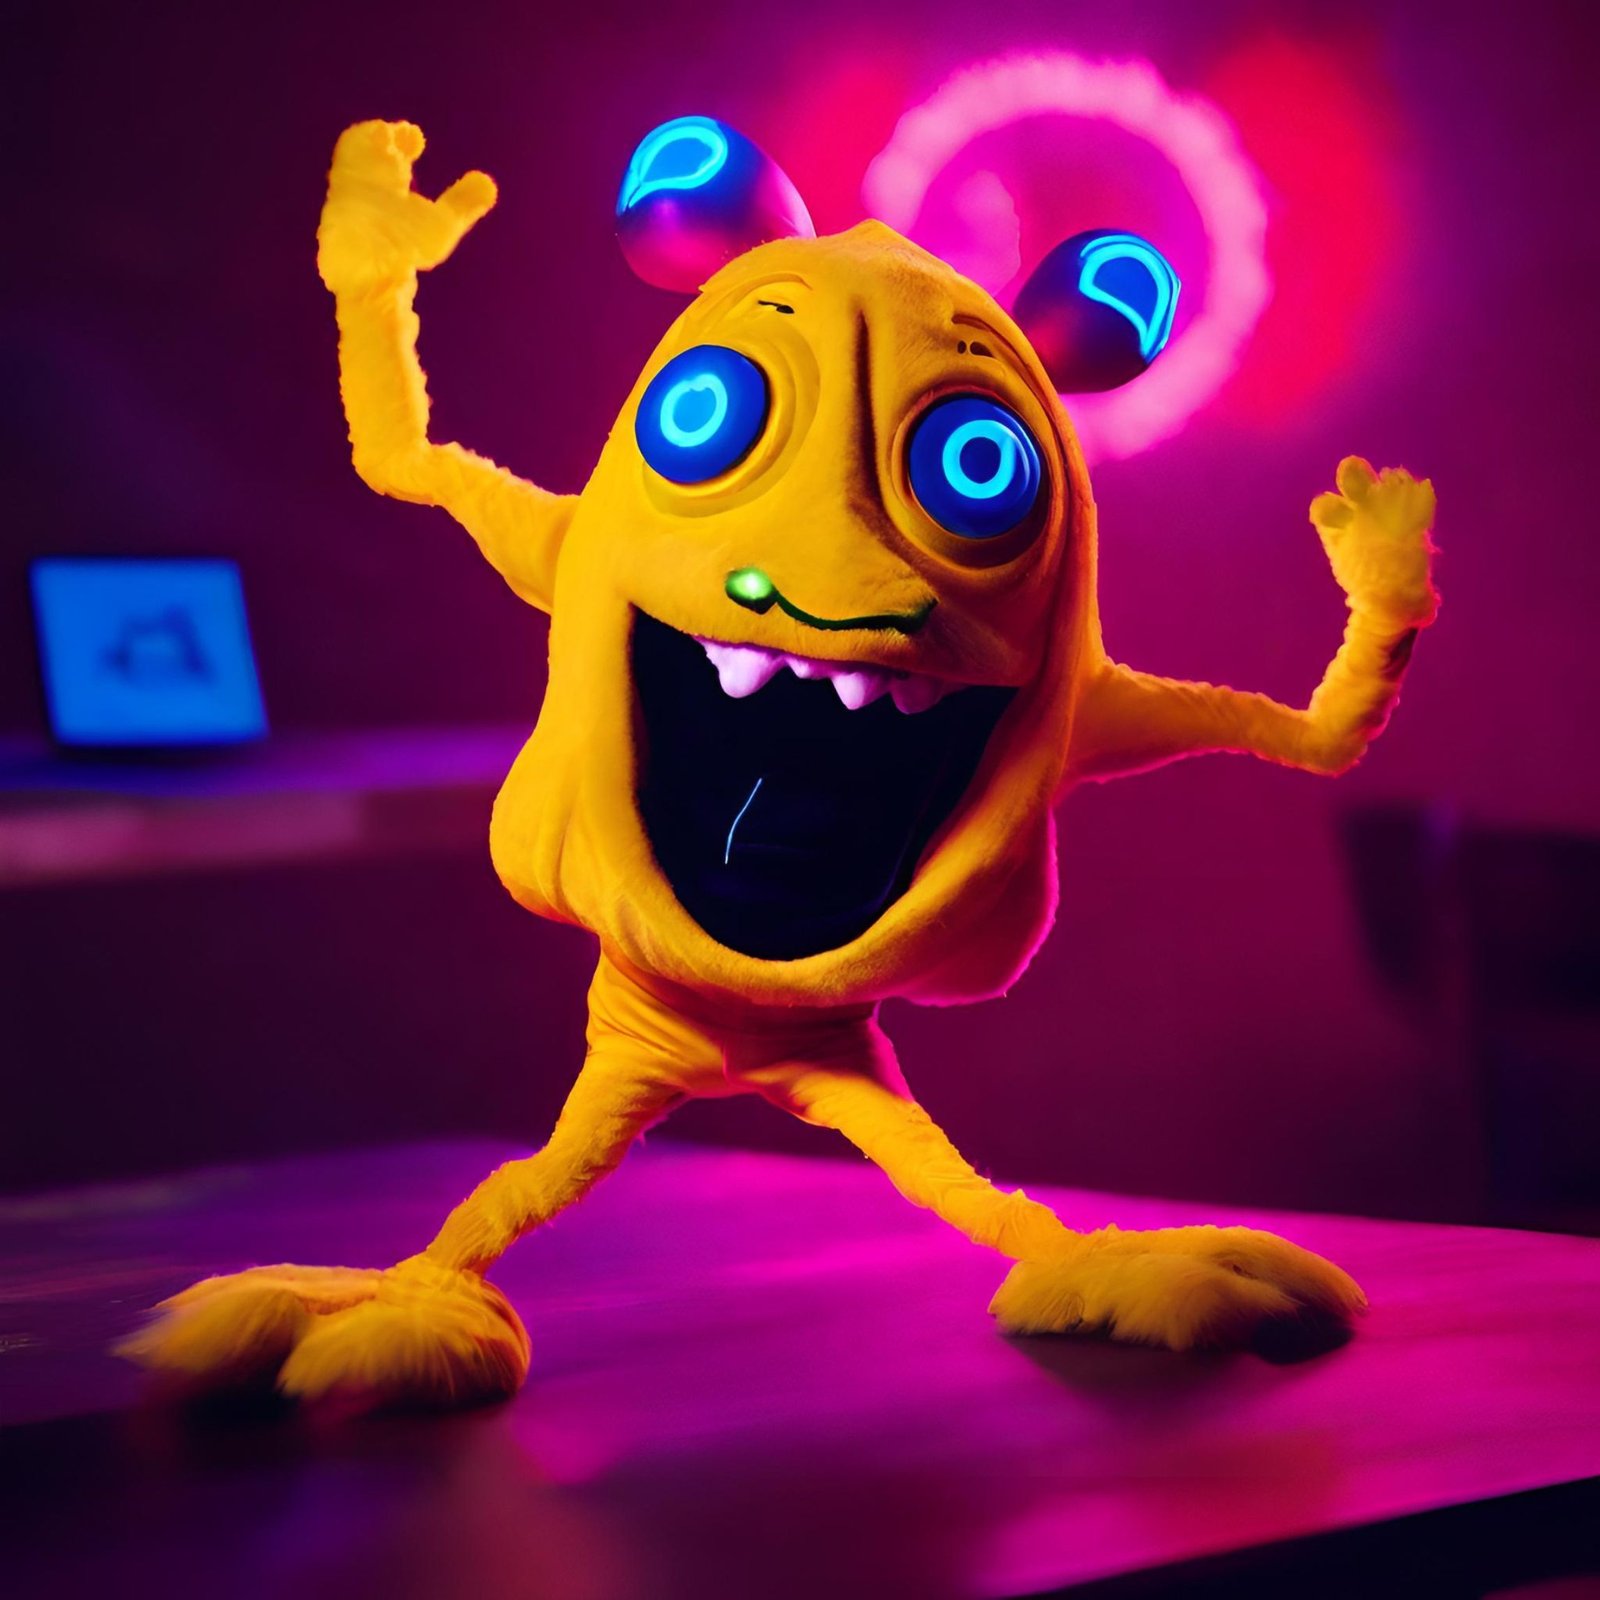 Animated image of the JavaScript mascot, a cheerful character, dancing on a table, featuring the DataTables in JavaScript logo on its JavaScript flag.